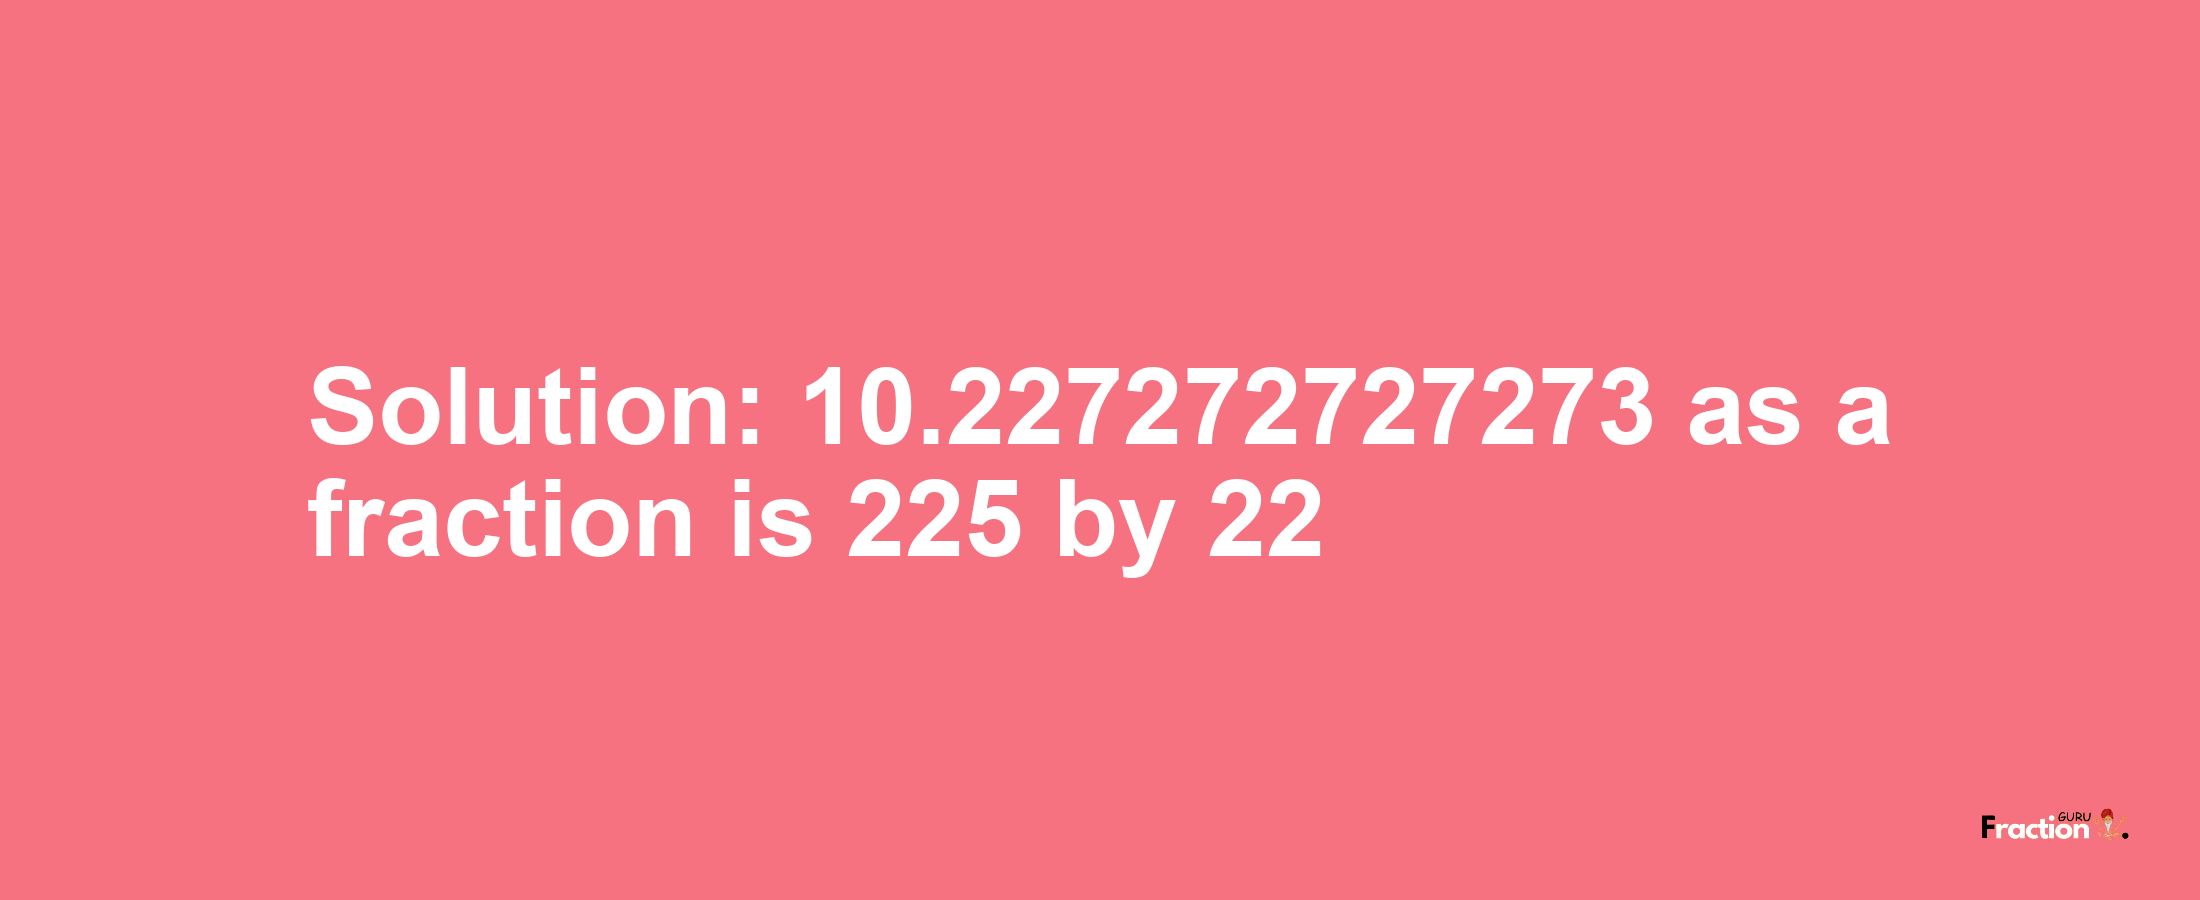 Solution:10.227272727273 as a fraction is 225/22